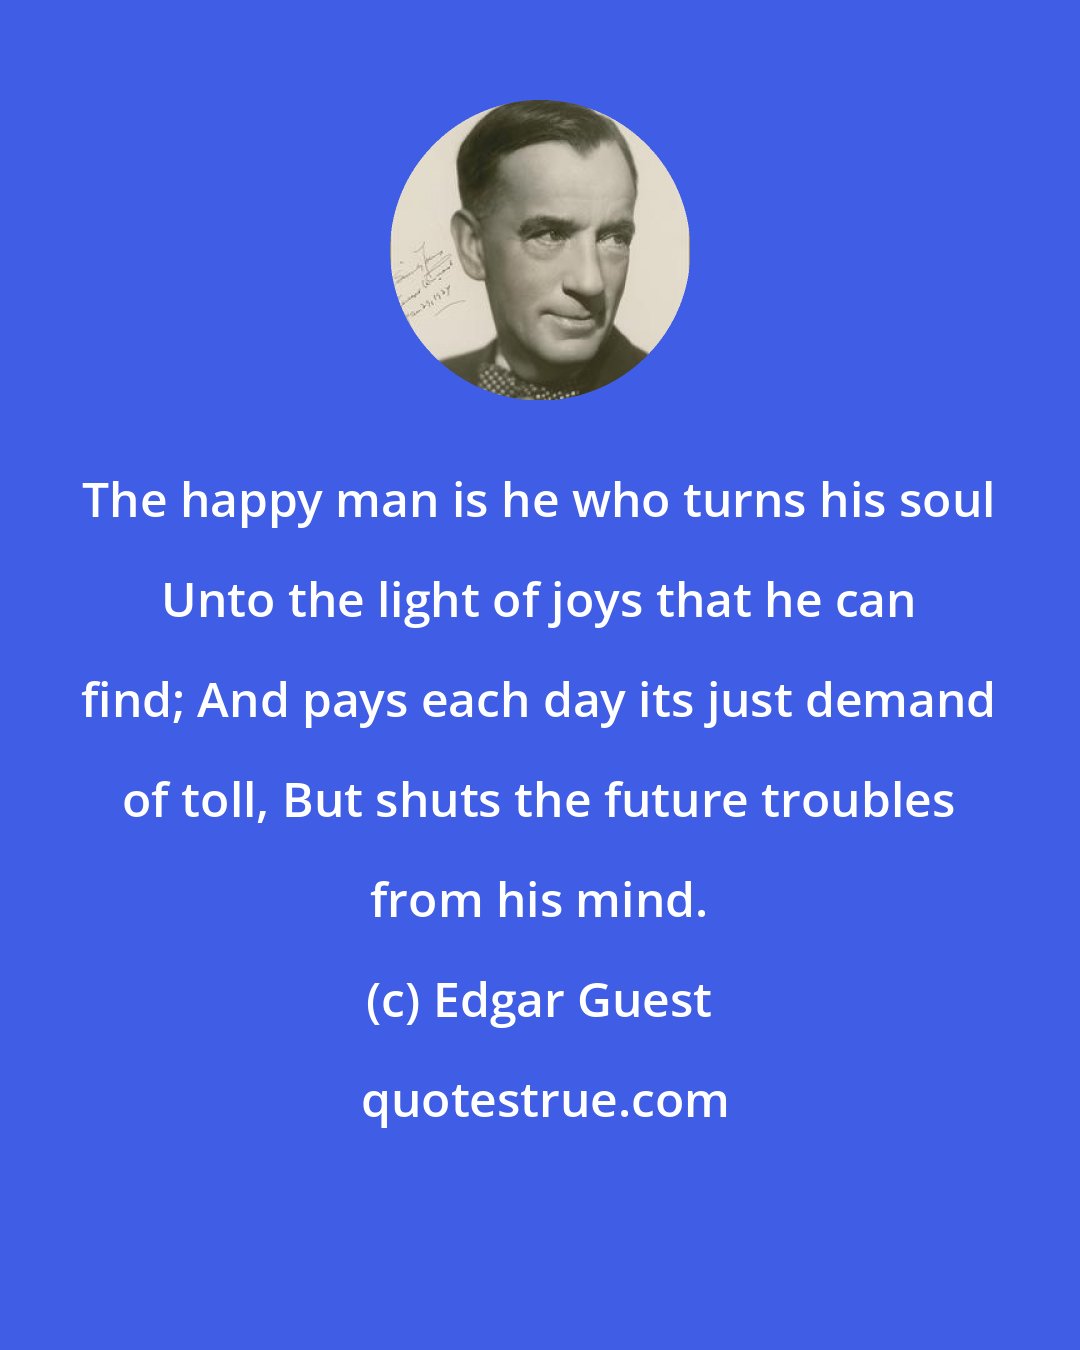 Edgar Guest: The happy man is he who turns his soul Unto the light of joys that he can find; And pays each day its just demand of toll, But shuts the future troubles from his mind.